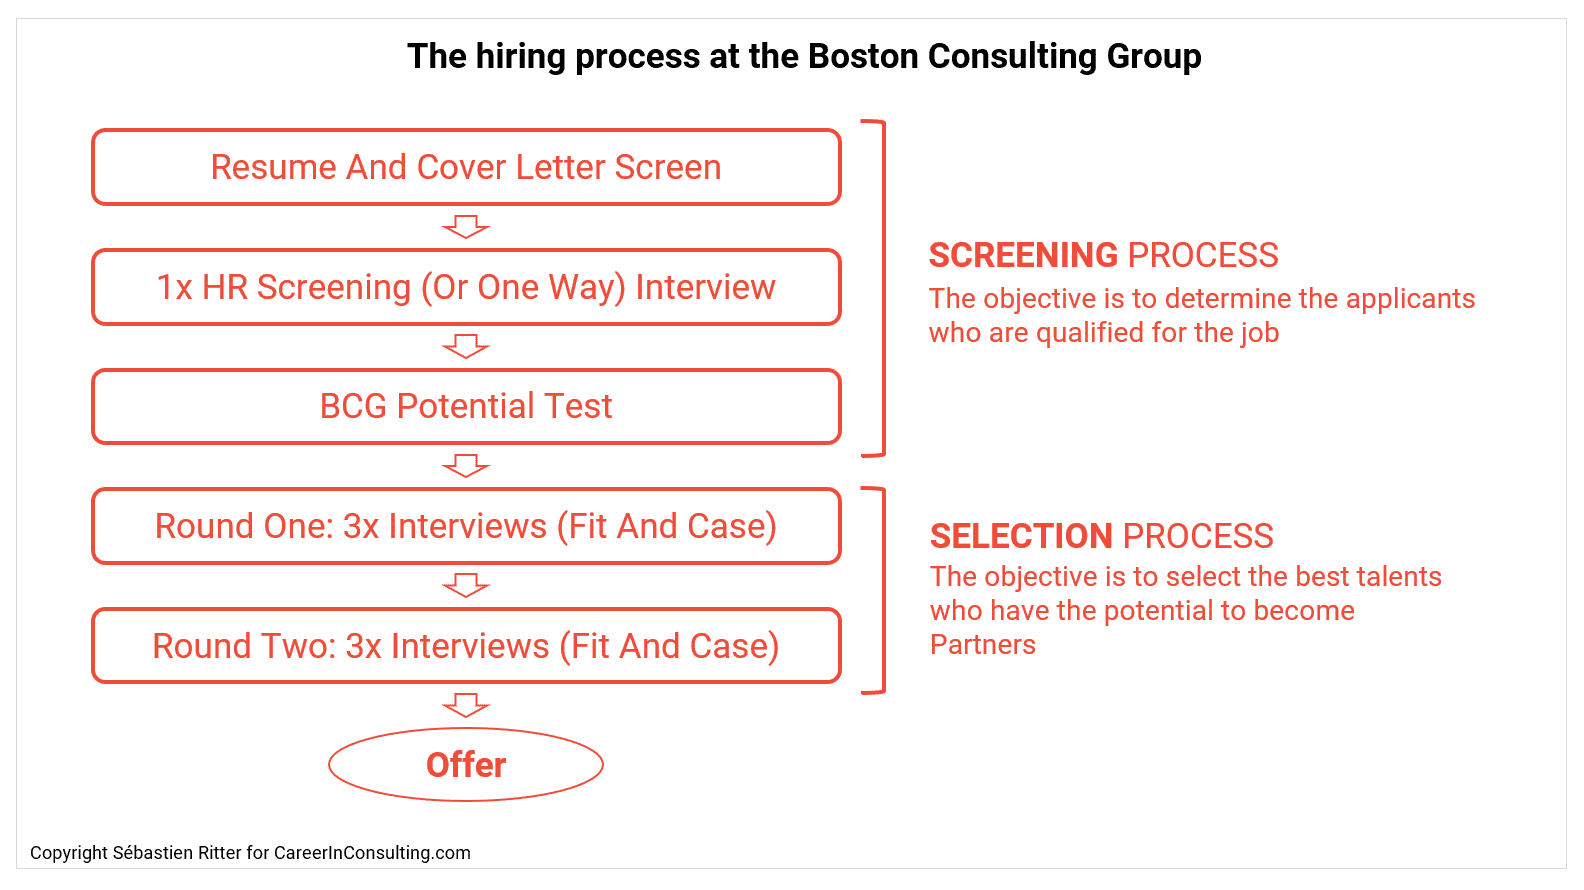 The hiring process at the Boston Consulting Group